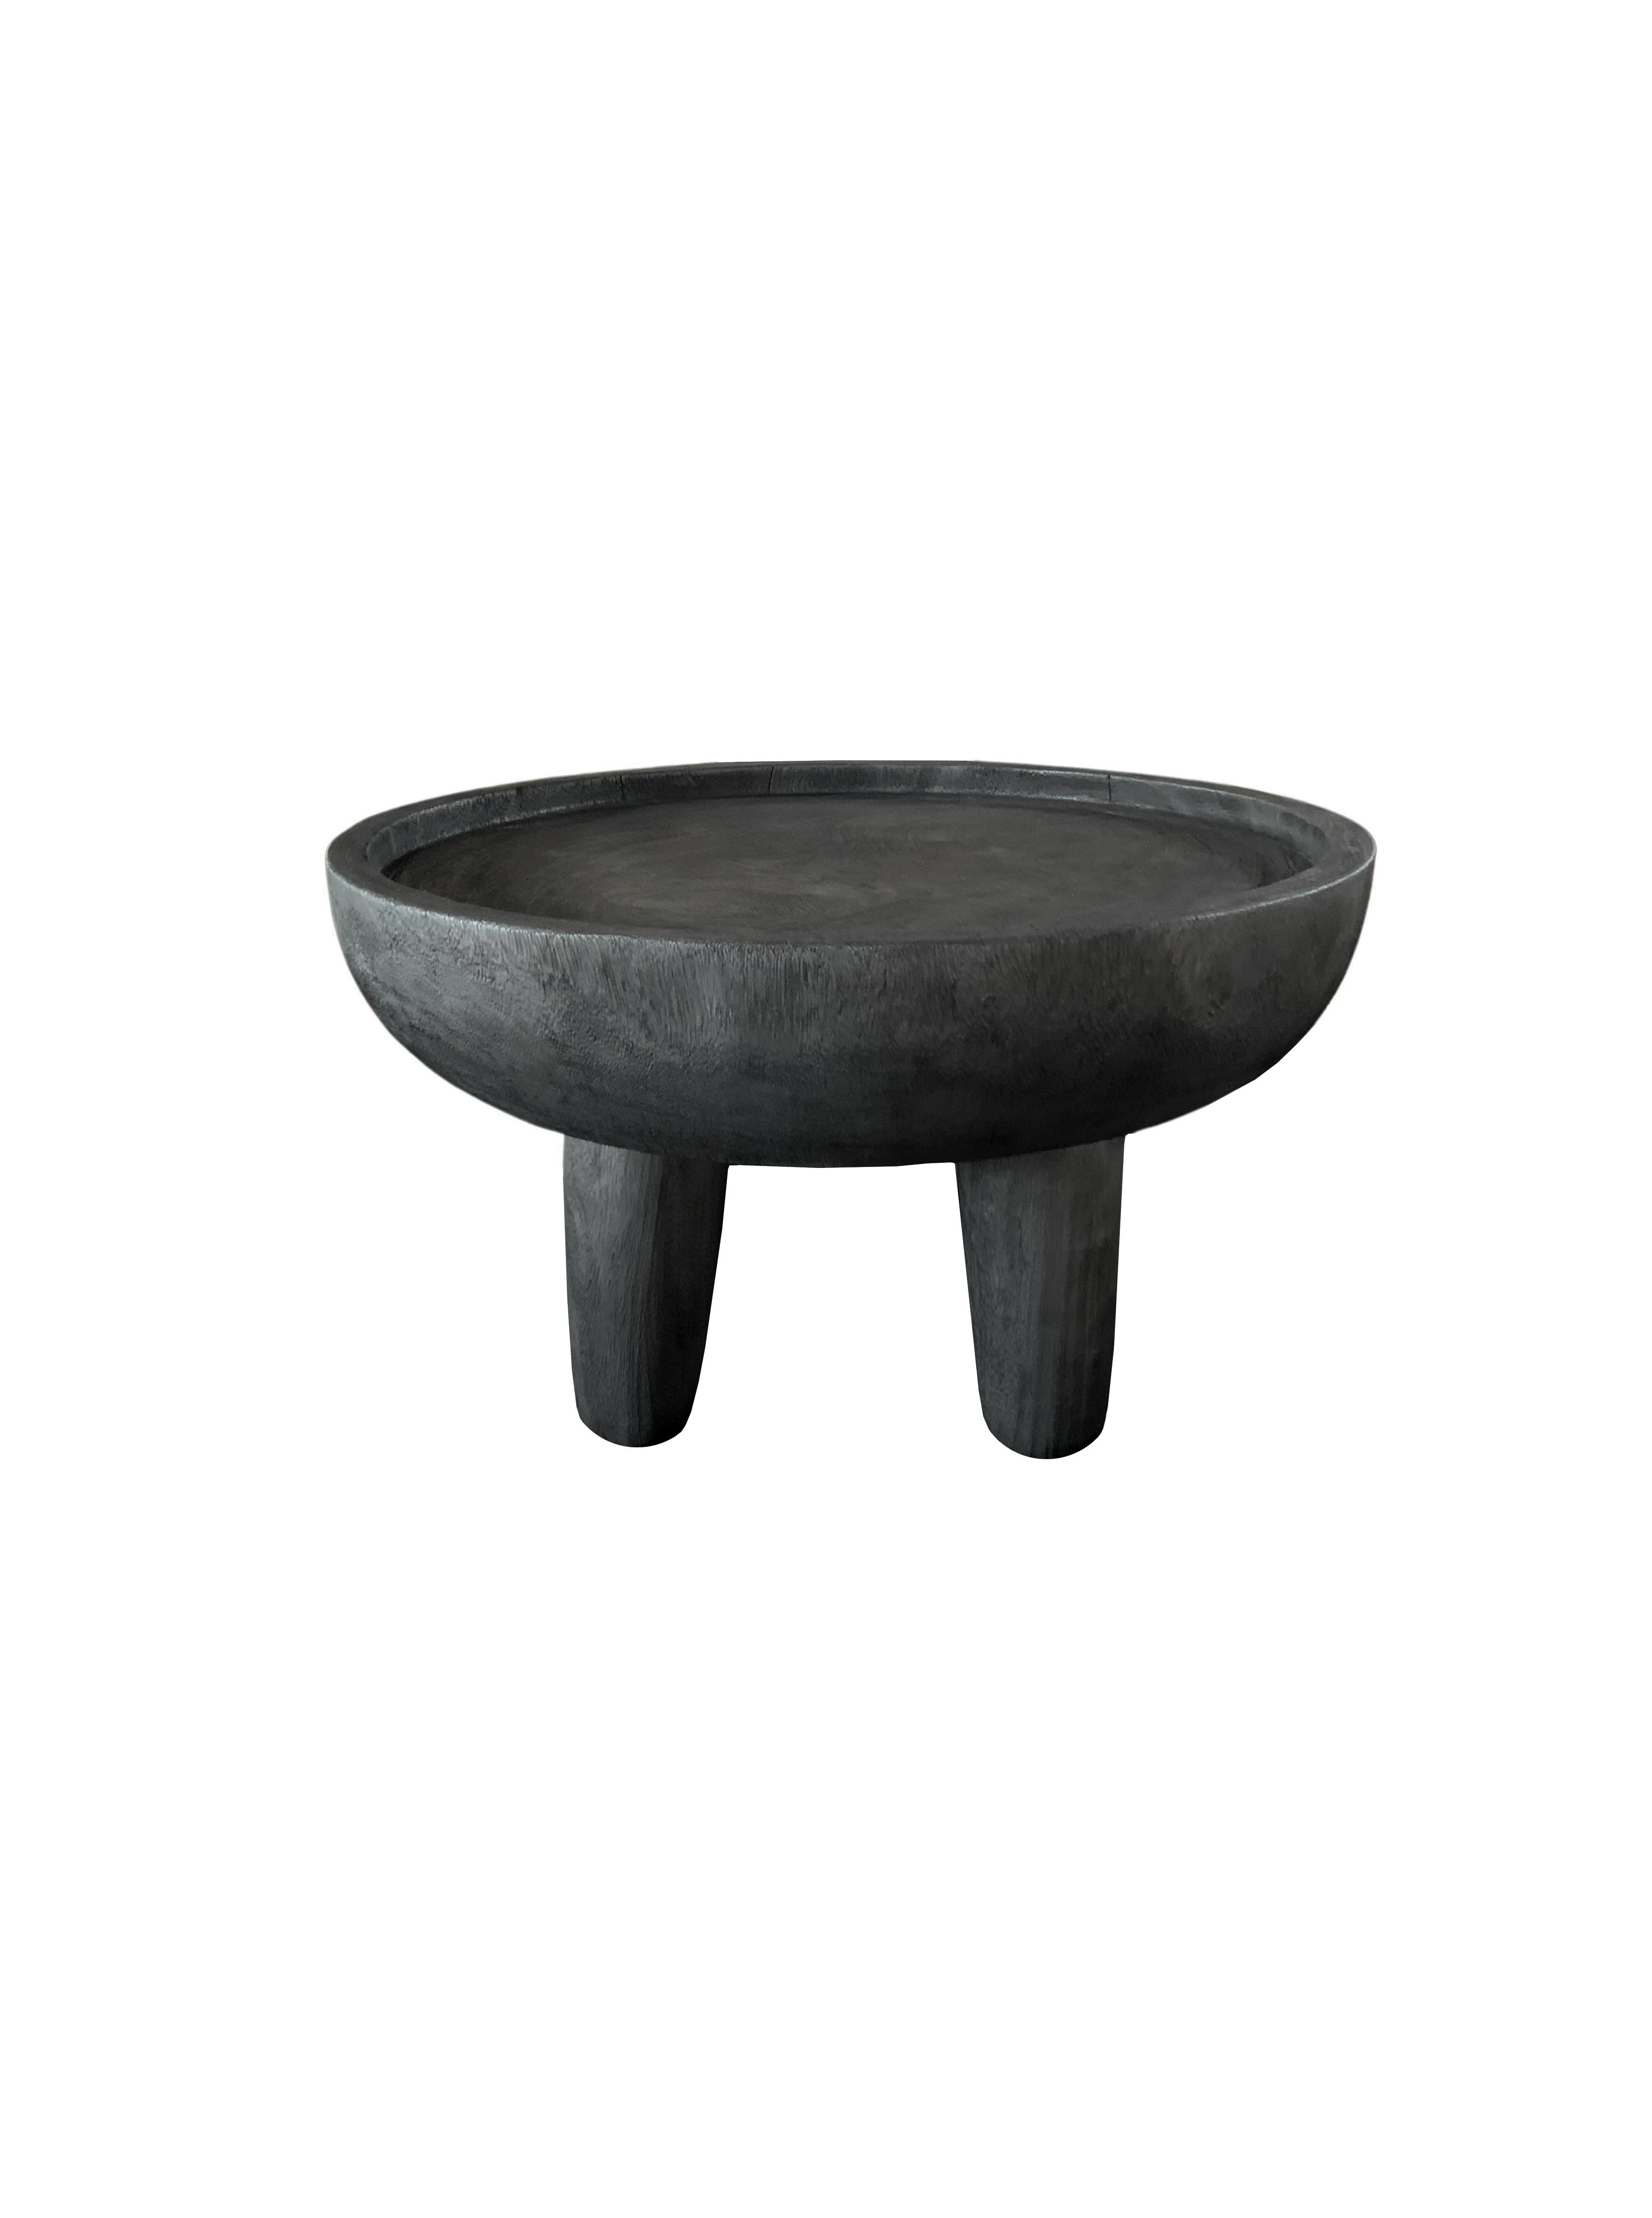 Organic Modern Sculptural Side Table Solid Mango Wood, Burnt Finish For Sale